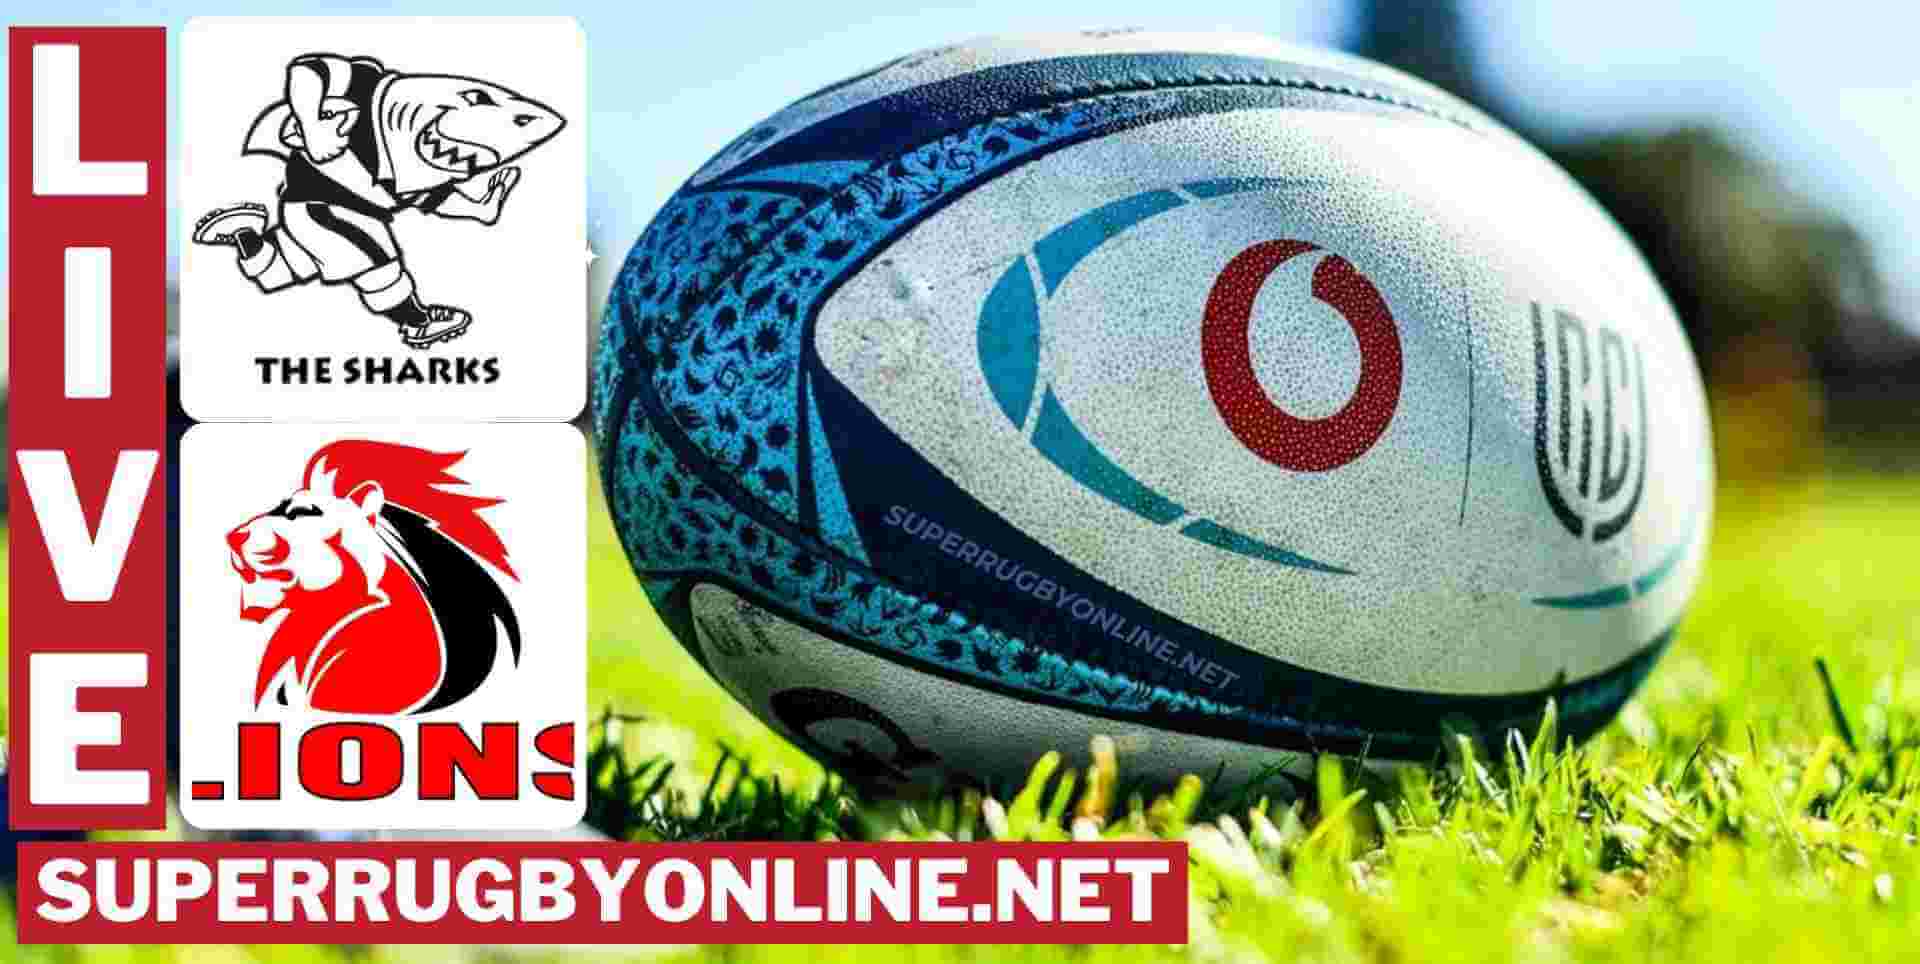 Live Sharks Vs Lions Rugby Stream